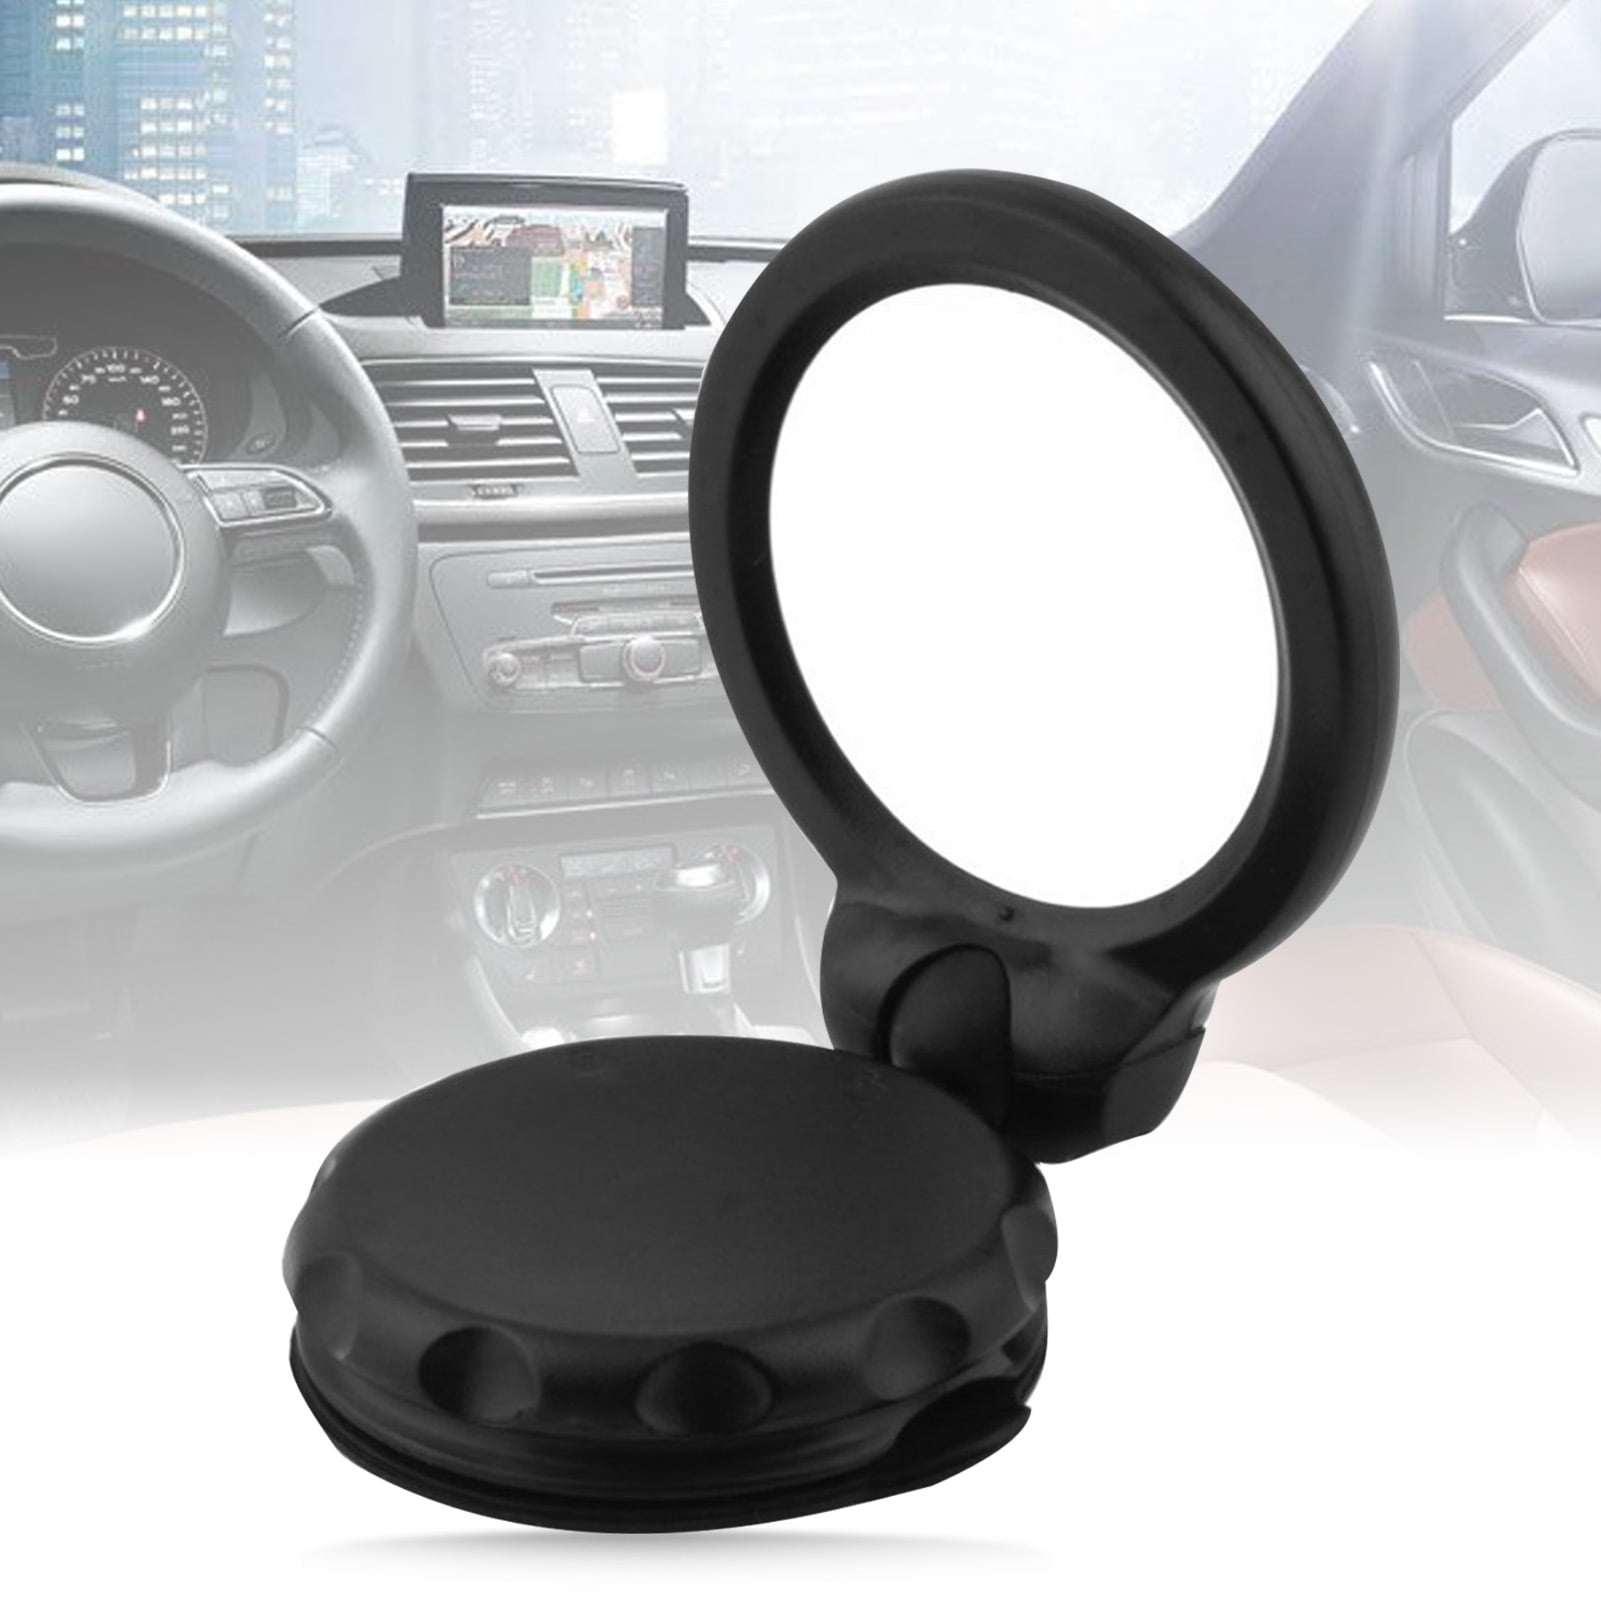 Practical Car Vehicle Windscreen Suction Cup Holder Mount for Tomtom one XL GPS 